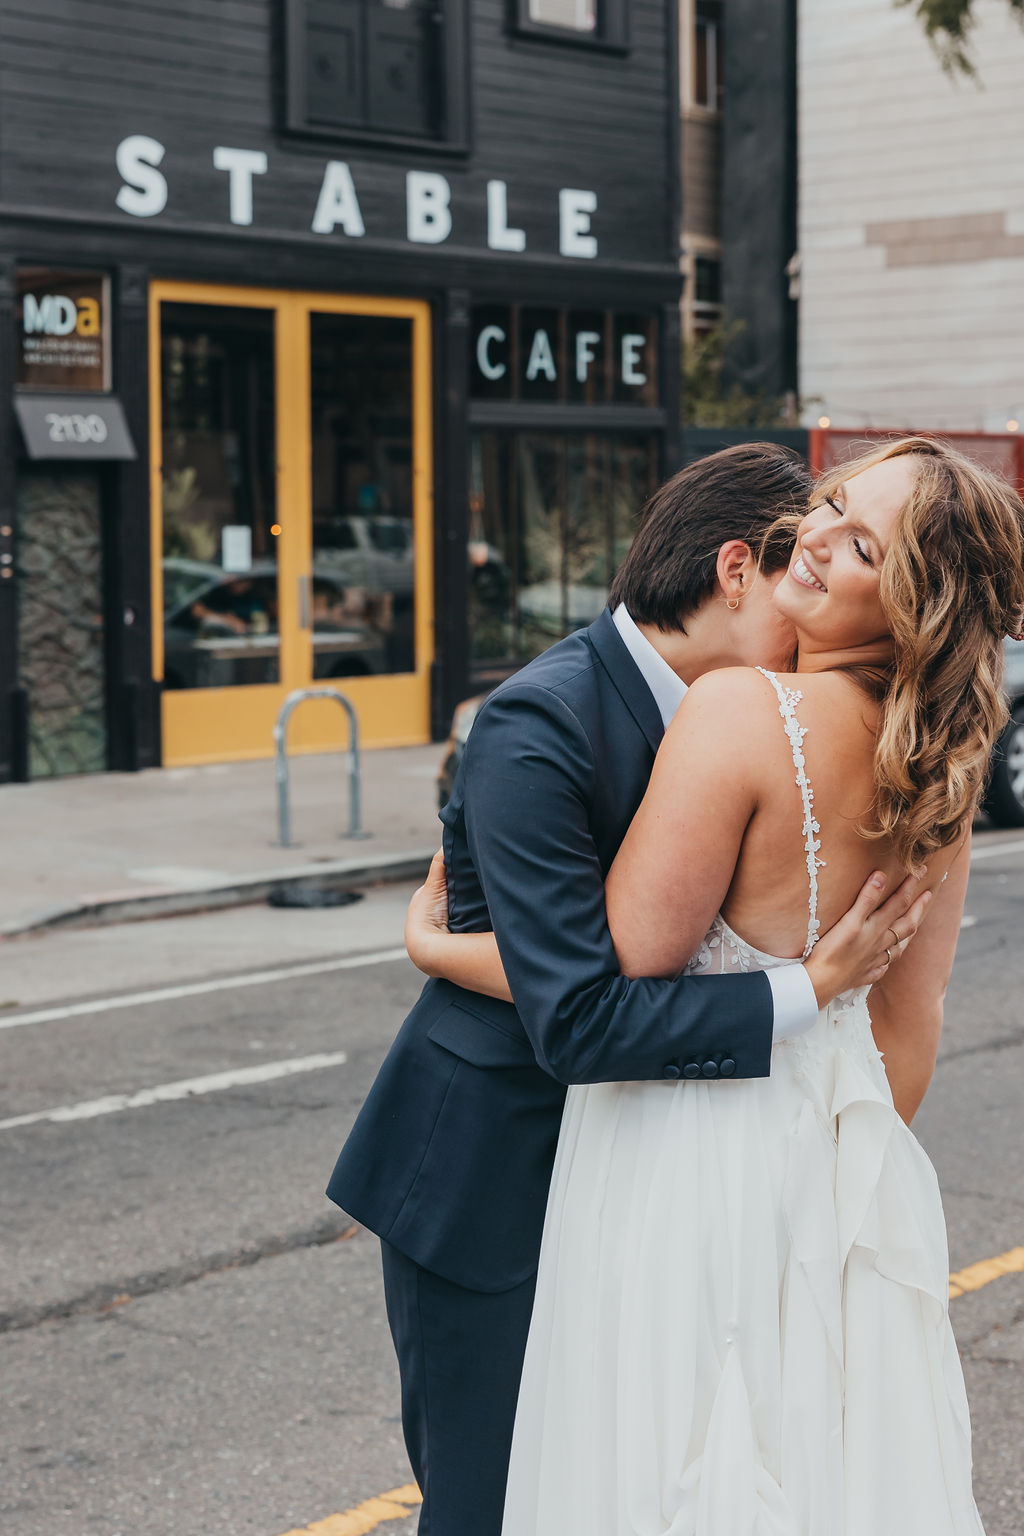 A couple in wedding attire embraces joyfully on a city street outside the stable cafe, 